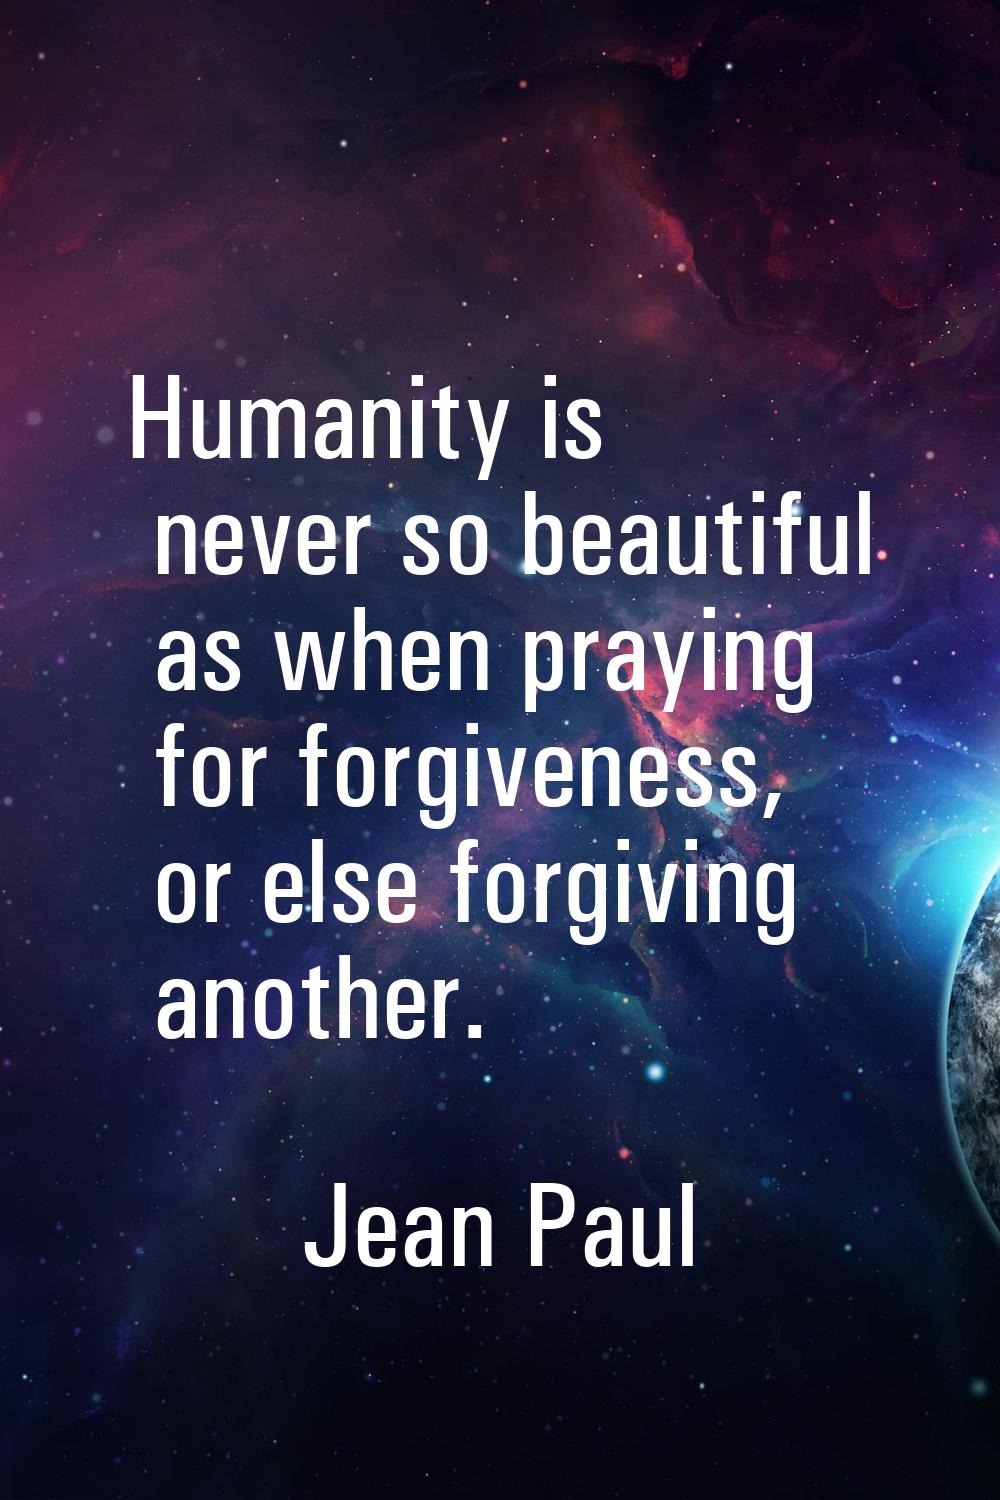 Humanity is never so beautiful as when praying for forgiveness, or else forgiving another.